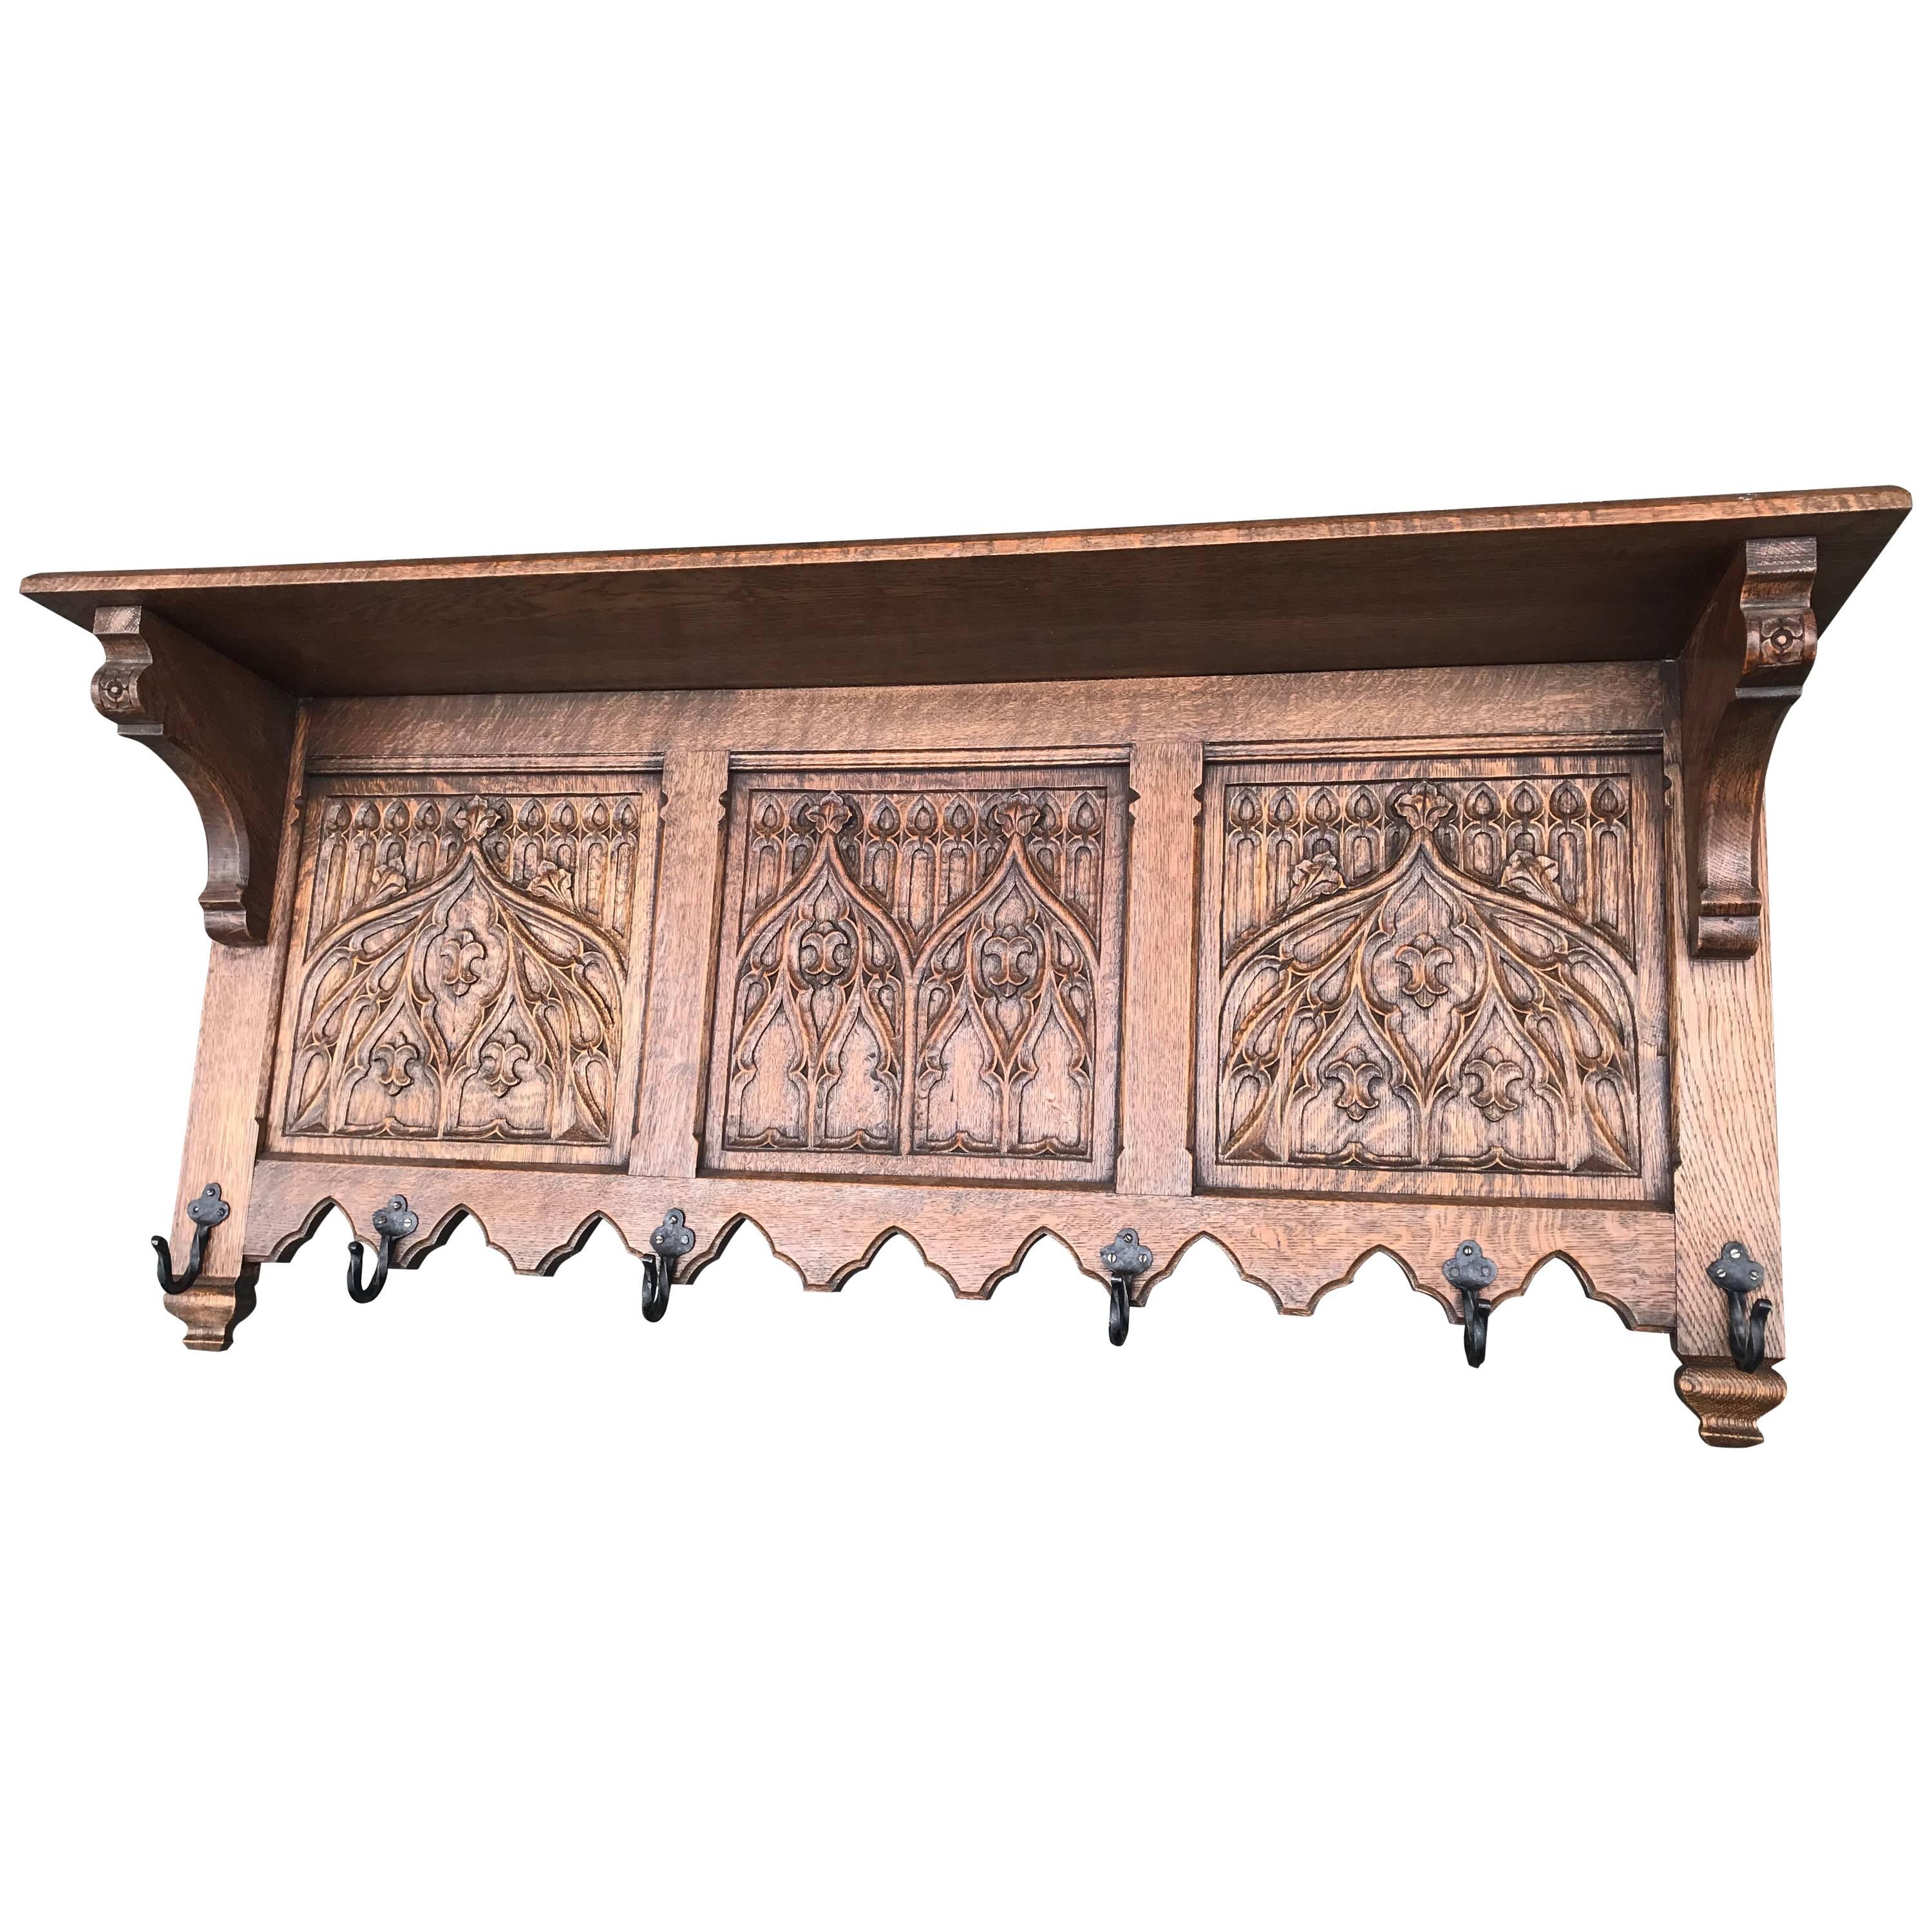 Hand-Carved Gothic Revival Coat Rack with Iron Hooks & Church Window Panels